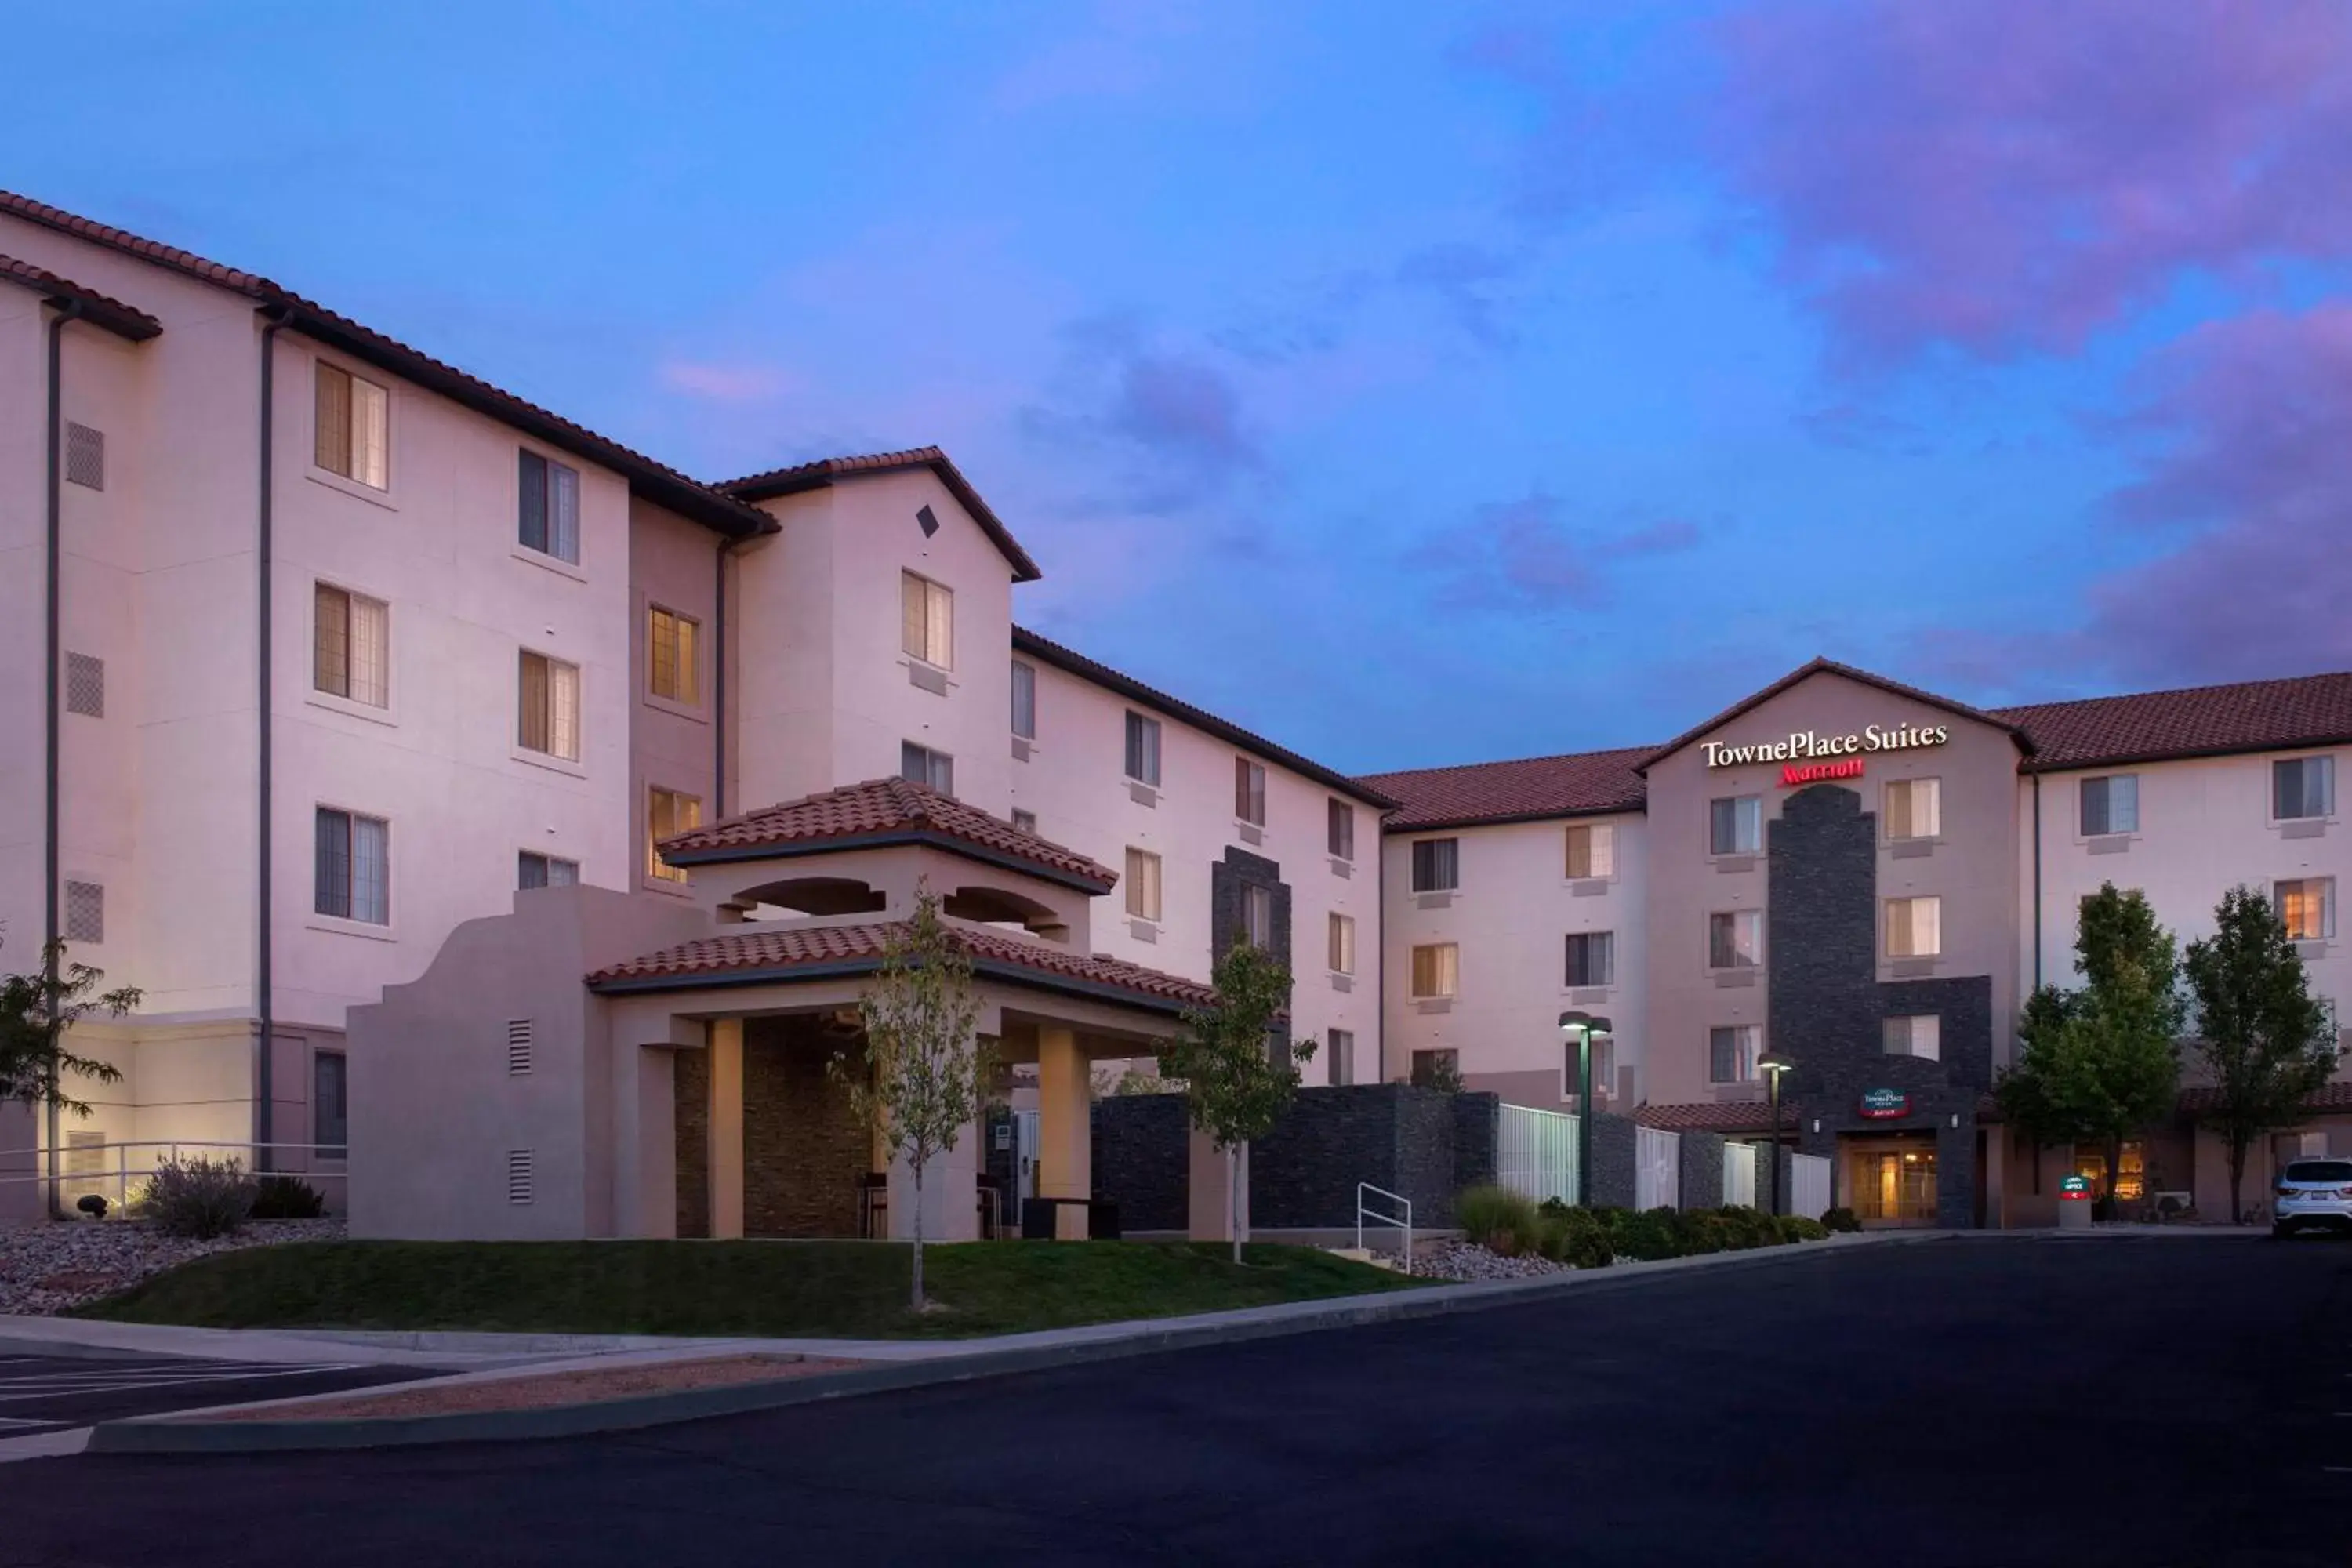 Property Building in TownePlace Suites by Marriott Albuquerque Airport